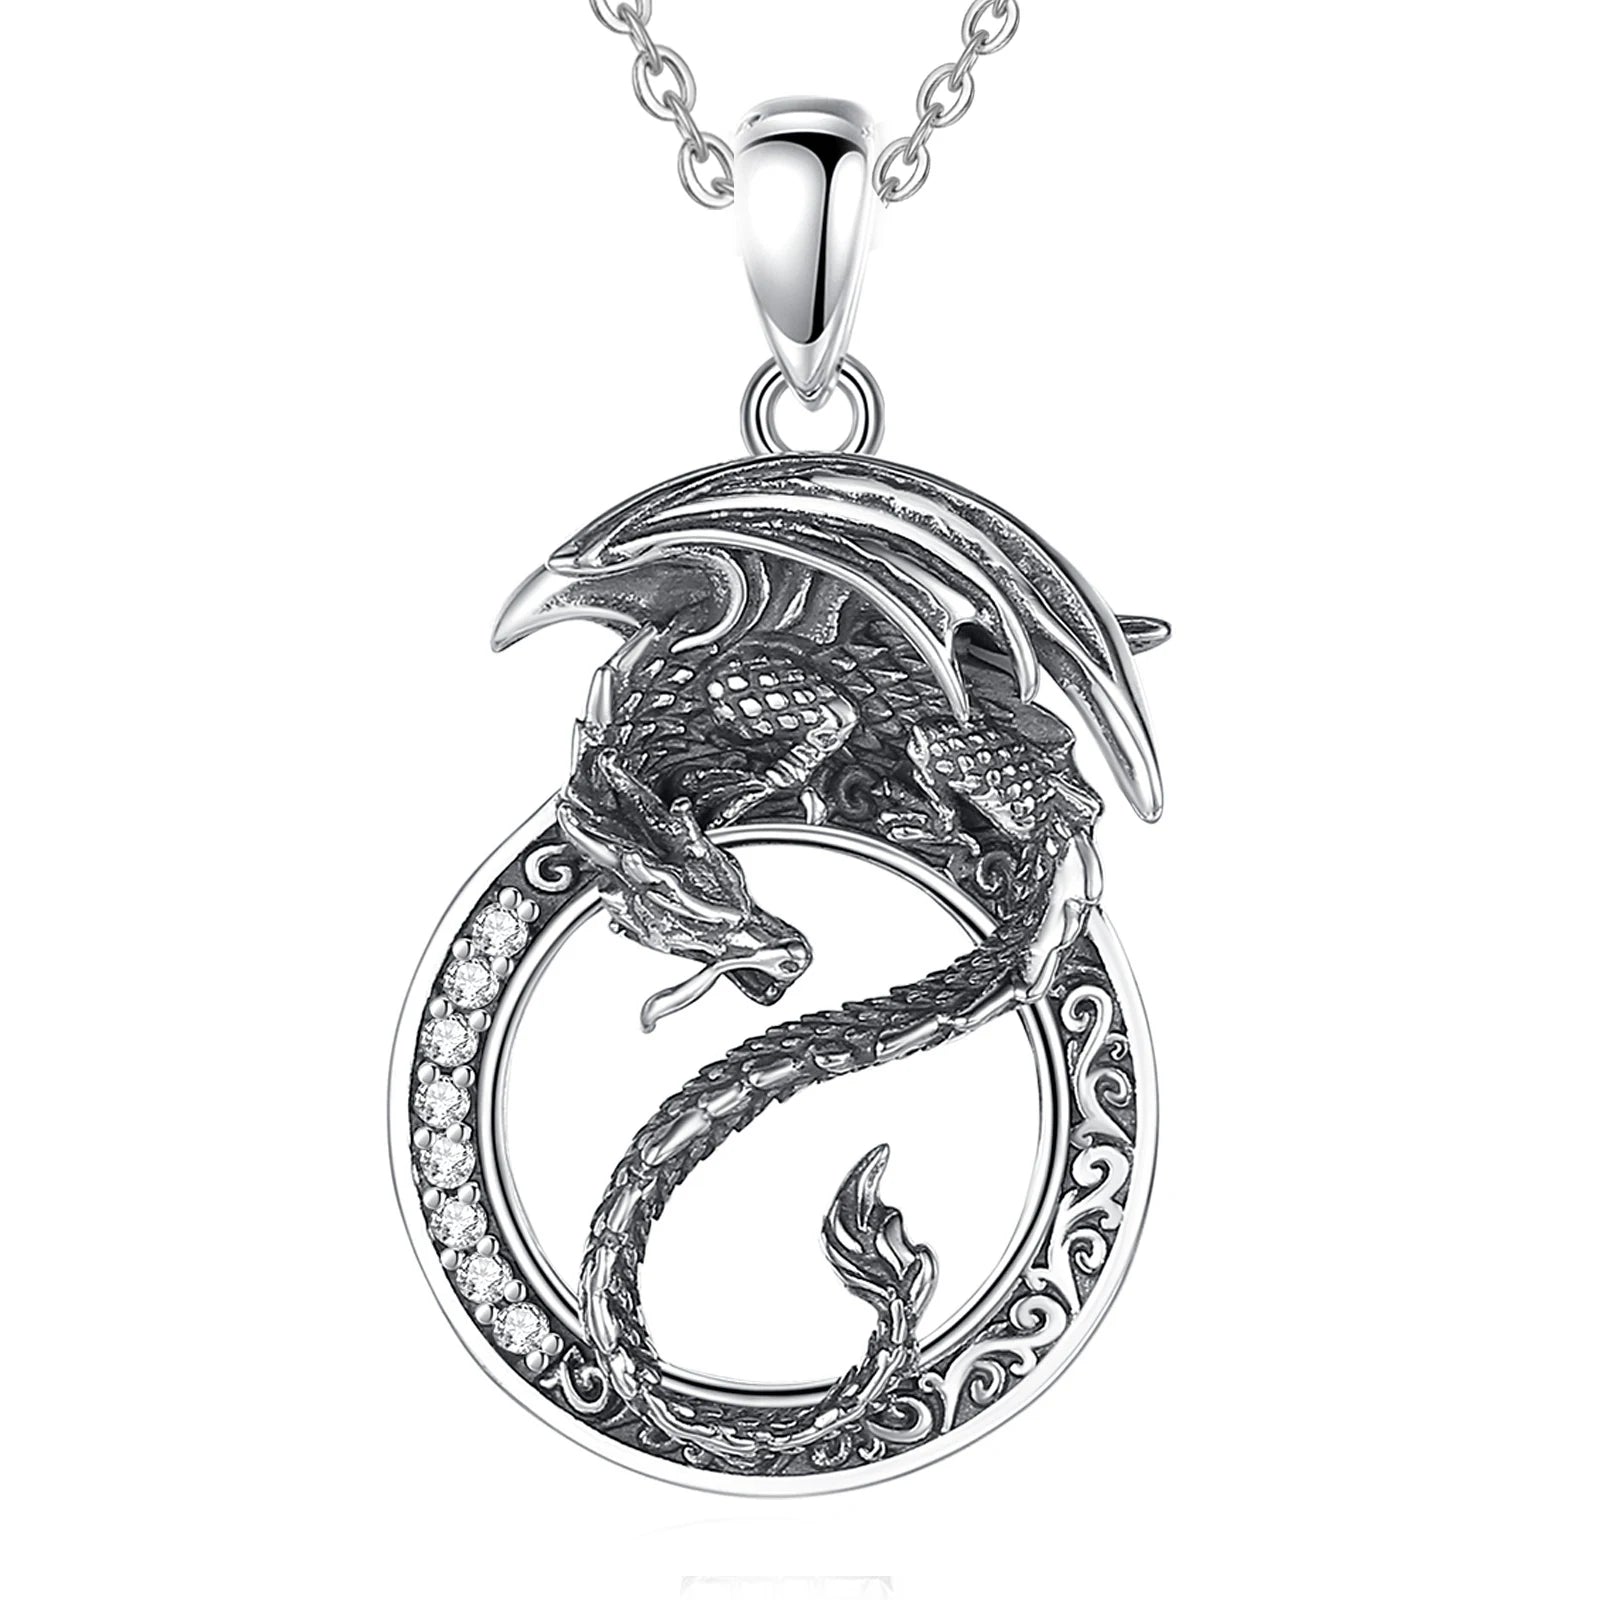 Norse Dragon 925 Sterling Silver Necklace With Zirconia Stones